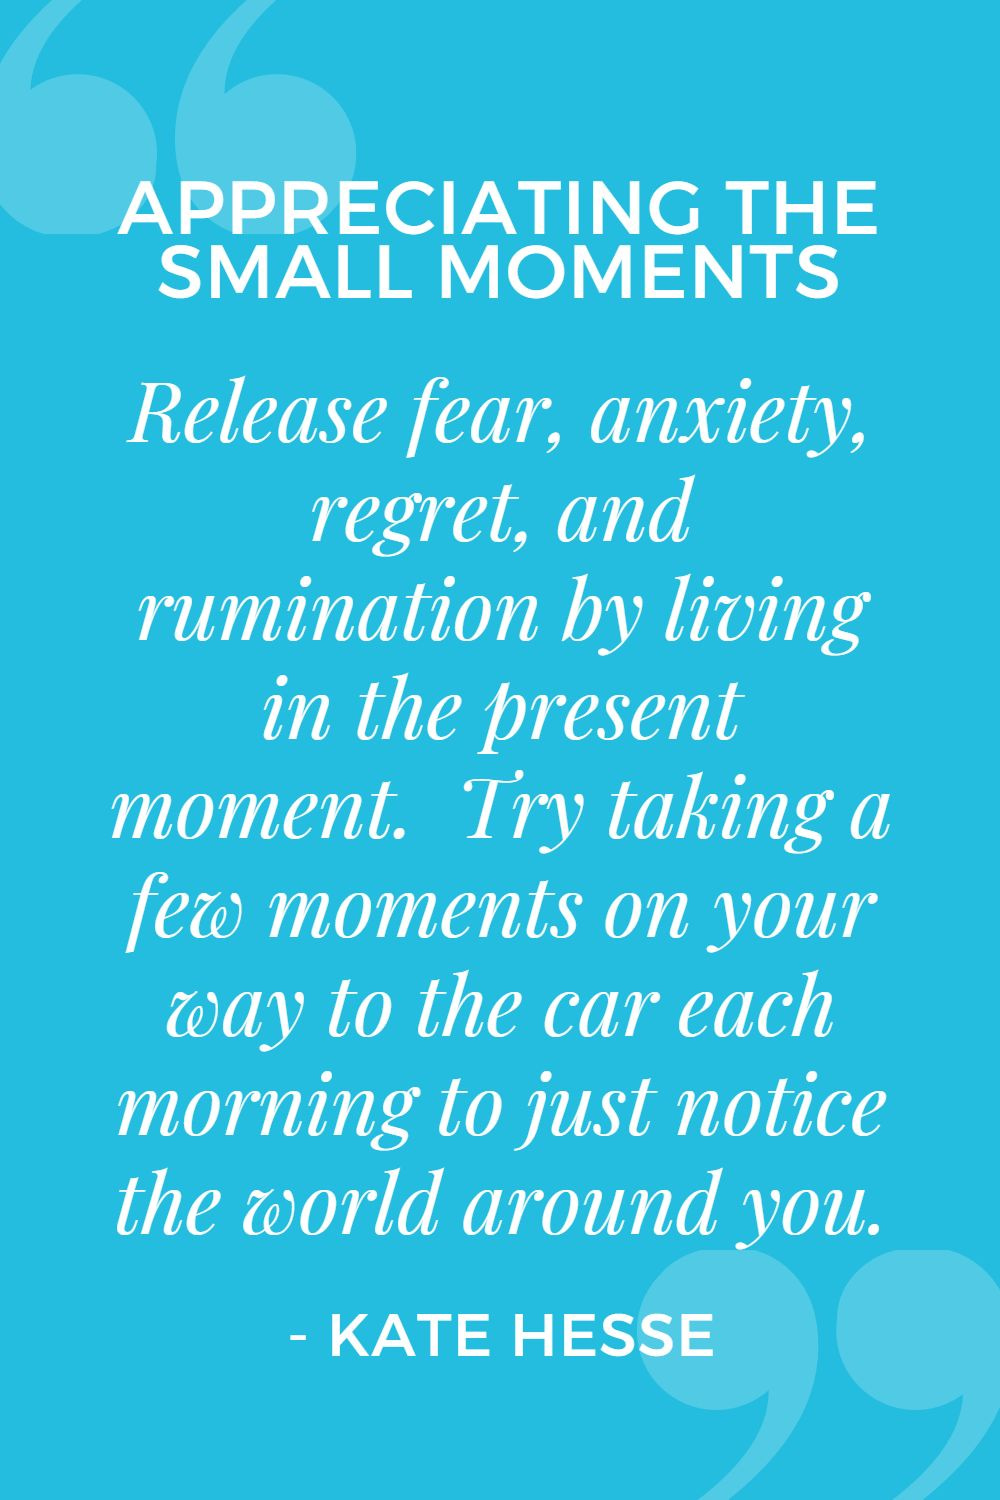 Release fear, anxiety, regret, and rumination by living in the present moment. Try taking a few moments on your way to the car each morning to just notice the world around you.